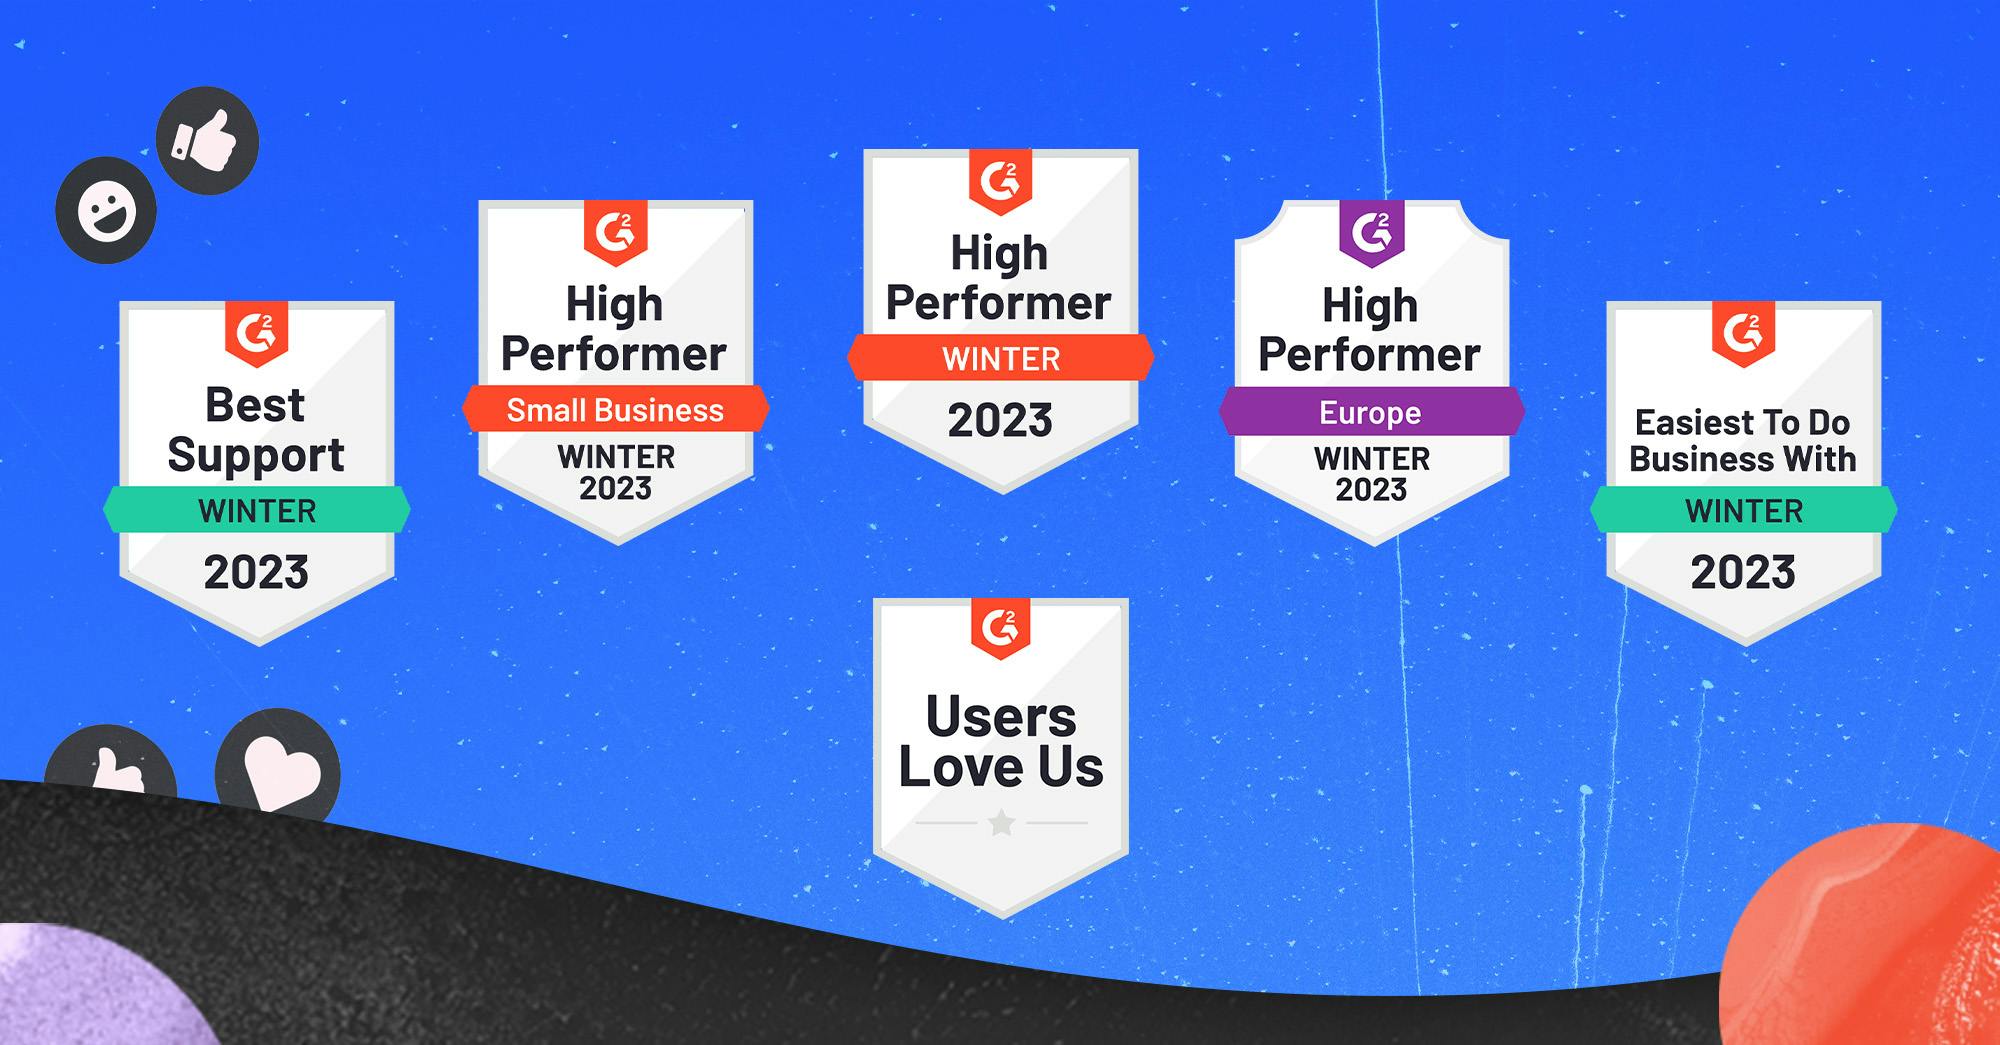 Univid receives 6 badges for high performer and top webinar platform winter 2023 by G2